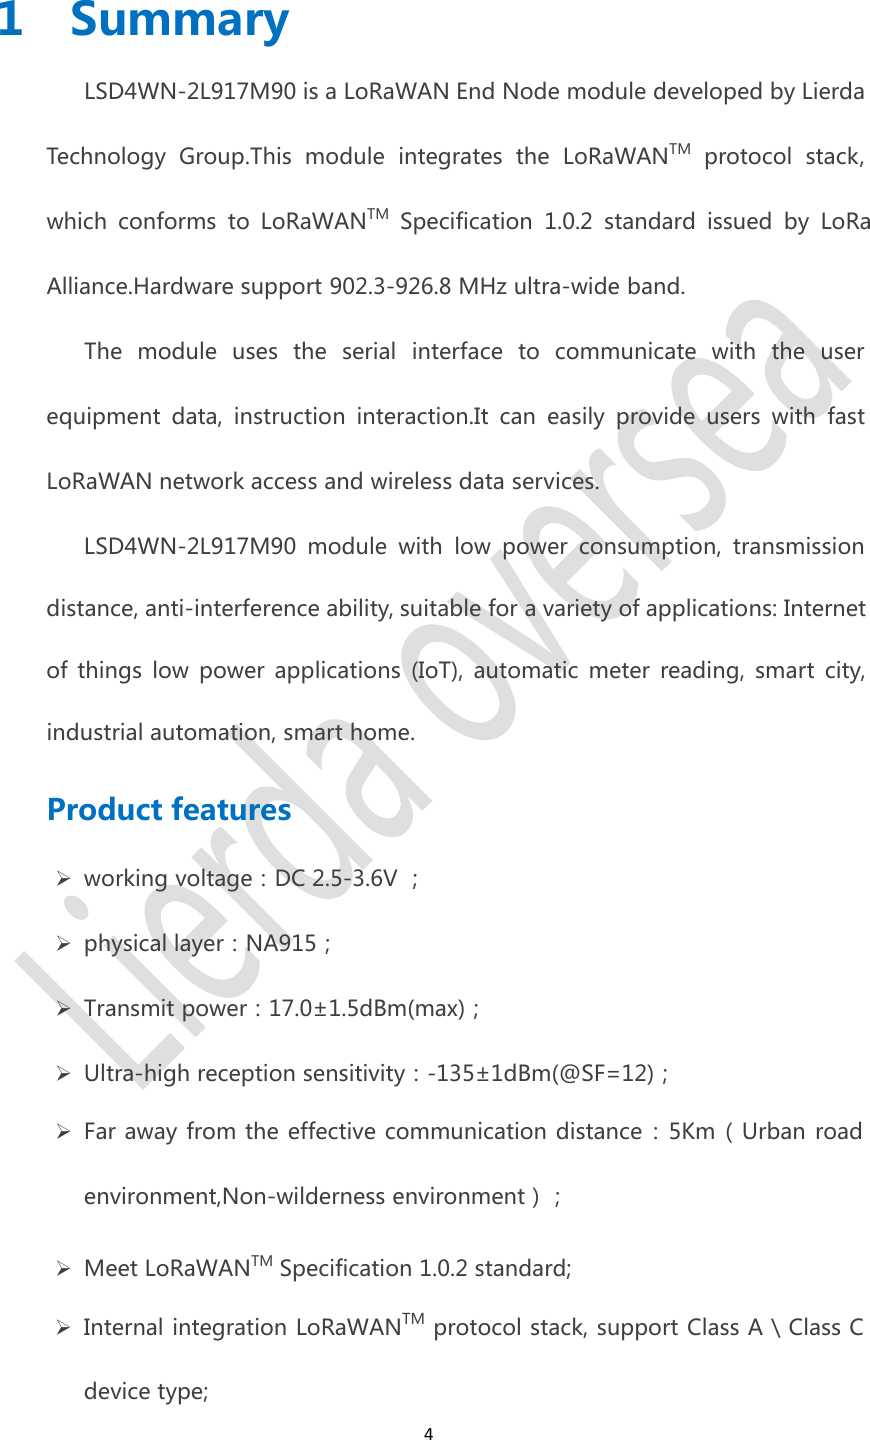 41 SummaryLSD4WN-2L917M90 is a LoRaWAN End Node module developed by Lierda Technology Group.This module integrates the LoRaWANTM protocol stack, which conforms to LoRaWANTM Specification 1.0.2 standard issued by LoRa Alliance.Hardware support 902.3-926.8 MHz ultra-wide band.The module uses the serial interface to communicate with the user equipment data, instruction interaction.It can easily provide users with fast LoRaWAN network access and wireless data services.LSD4WN-2L917M90 module with low power consumption, transmission distance, anti-interference ability, suitable for a variety of applications: Internet of things low power applications (IoT), automatic meter reading, smart city, industrial automation, smart home.Product featuresworking voltage：DC 2.5-3.6V ；physical layer：NA915；Transmit power：17.0±1.5dBm(max)；Ultra-high reception sensitivity：-135±1dBm(@SF=12)；Far away from the effective communication distance：5Km（Urban roadenvironment,Non-wilderness environment）；Meet LoRaWANTM Specification 1.0.2 standard;Internal integration LoRaWANTM protocol stack, support Class A \ Class Cdevice type;